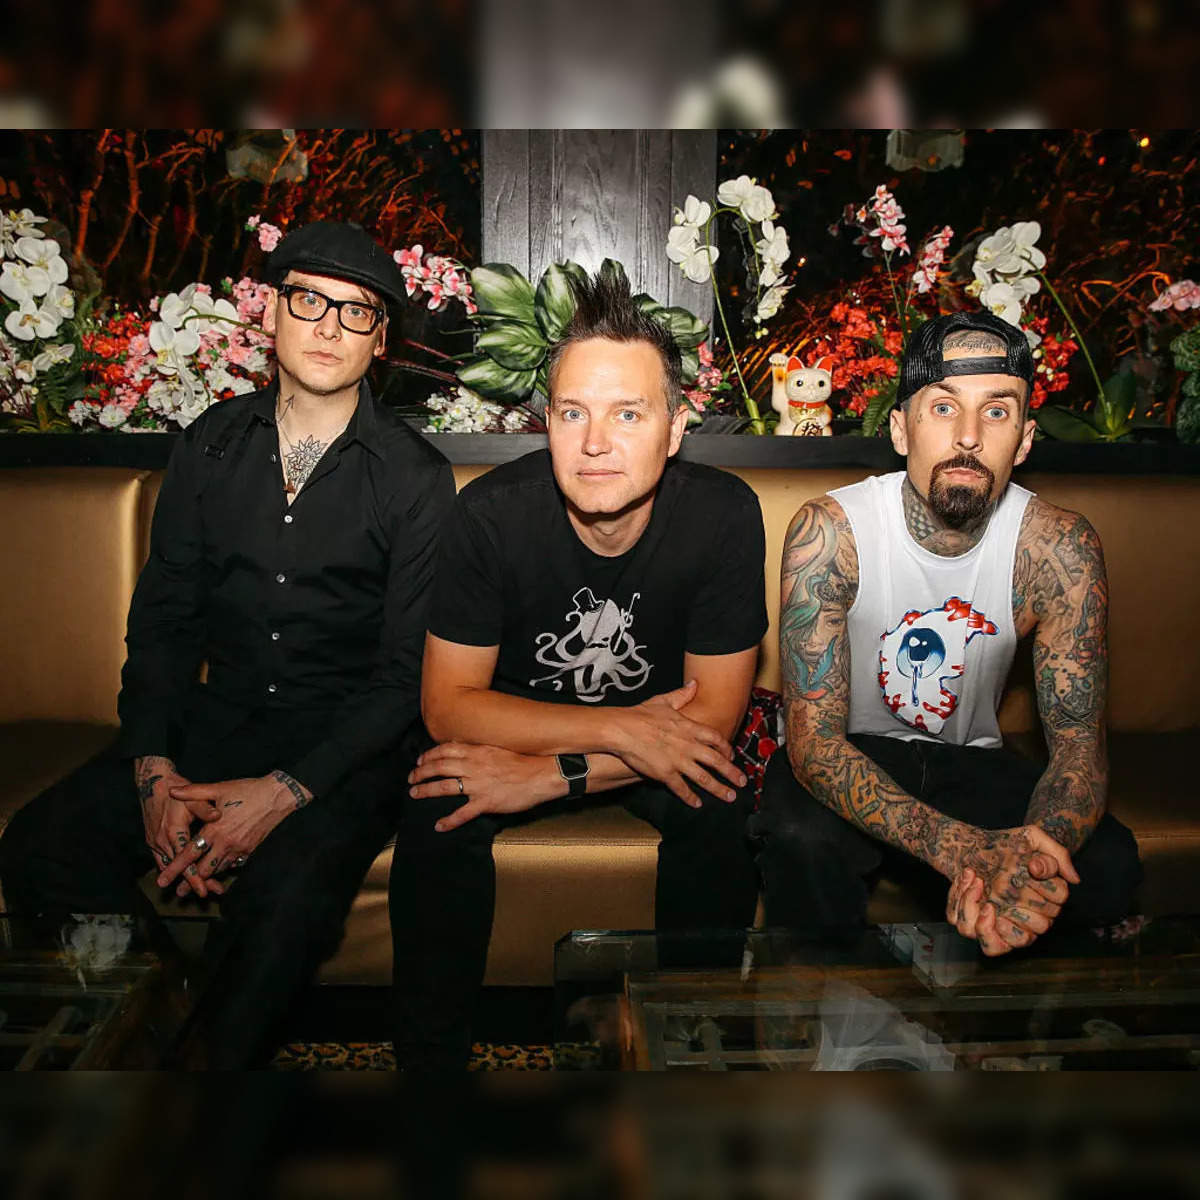 Blink-182 Share New Songs “One More Time” and “More Than You Know”: Listen